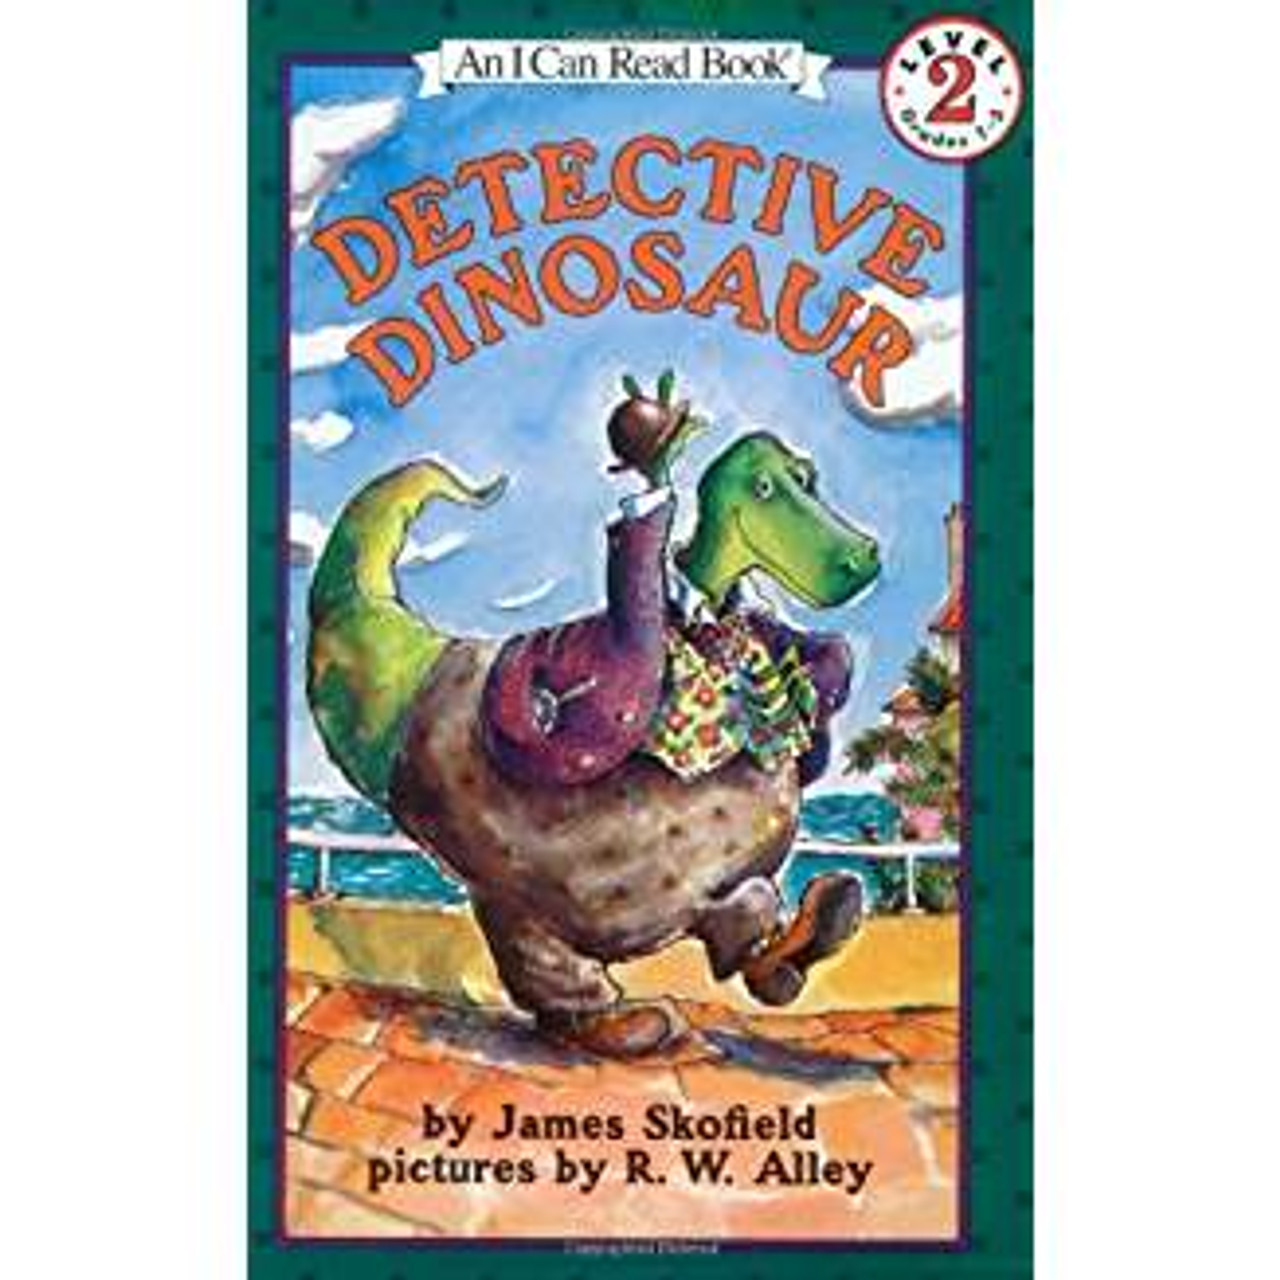 With the help of his sidekick, Officer Pterodactyl, Detective Dinosaur cracks the case of the missing hat, the squeaky shoe, and the scary shadow. The simple mysteries are perfect for young readers, and the appealing characters add just the right touch of humor. Full color.